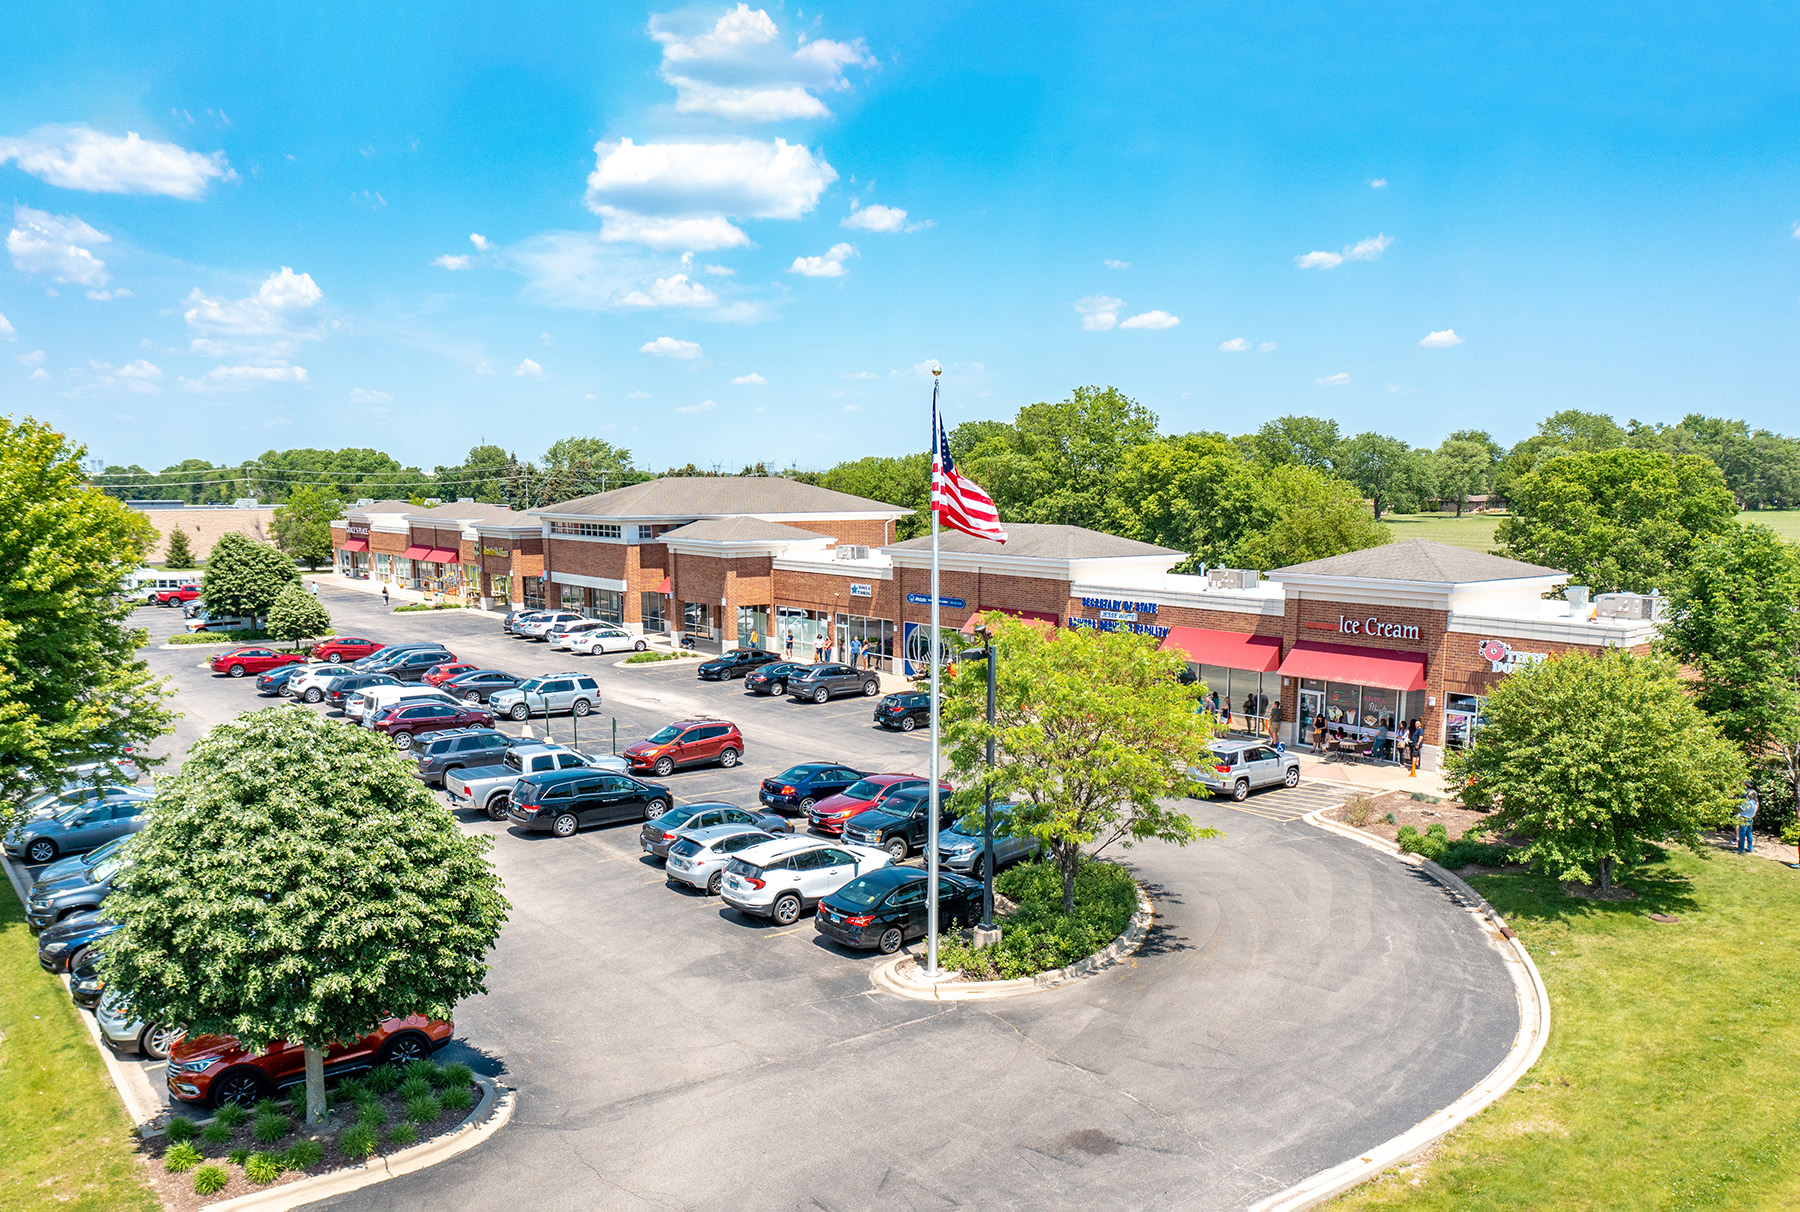 Hanley Investment Group Arranges Sales of Three Multi-Tenant, Daily Needs Retail Centers in the Chicago Suburbs for over $10 Million